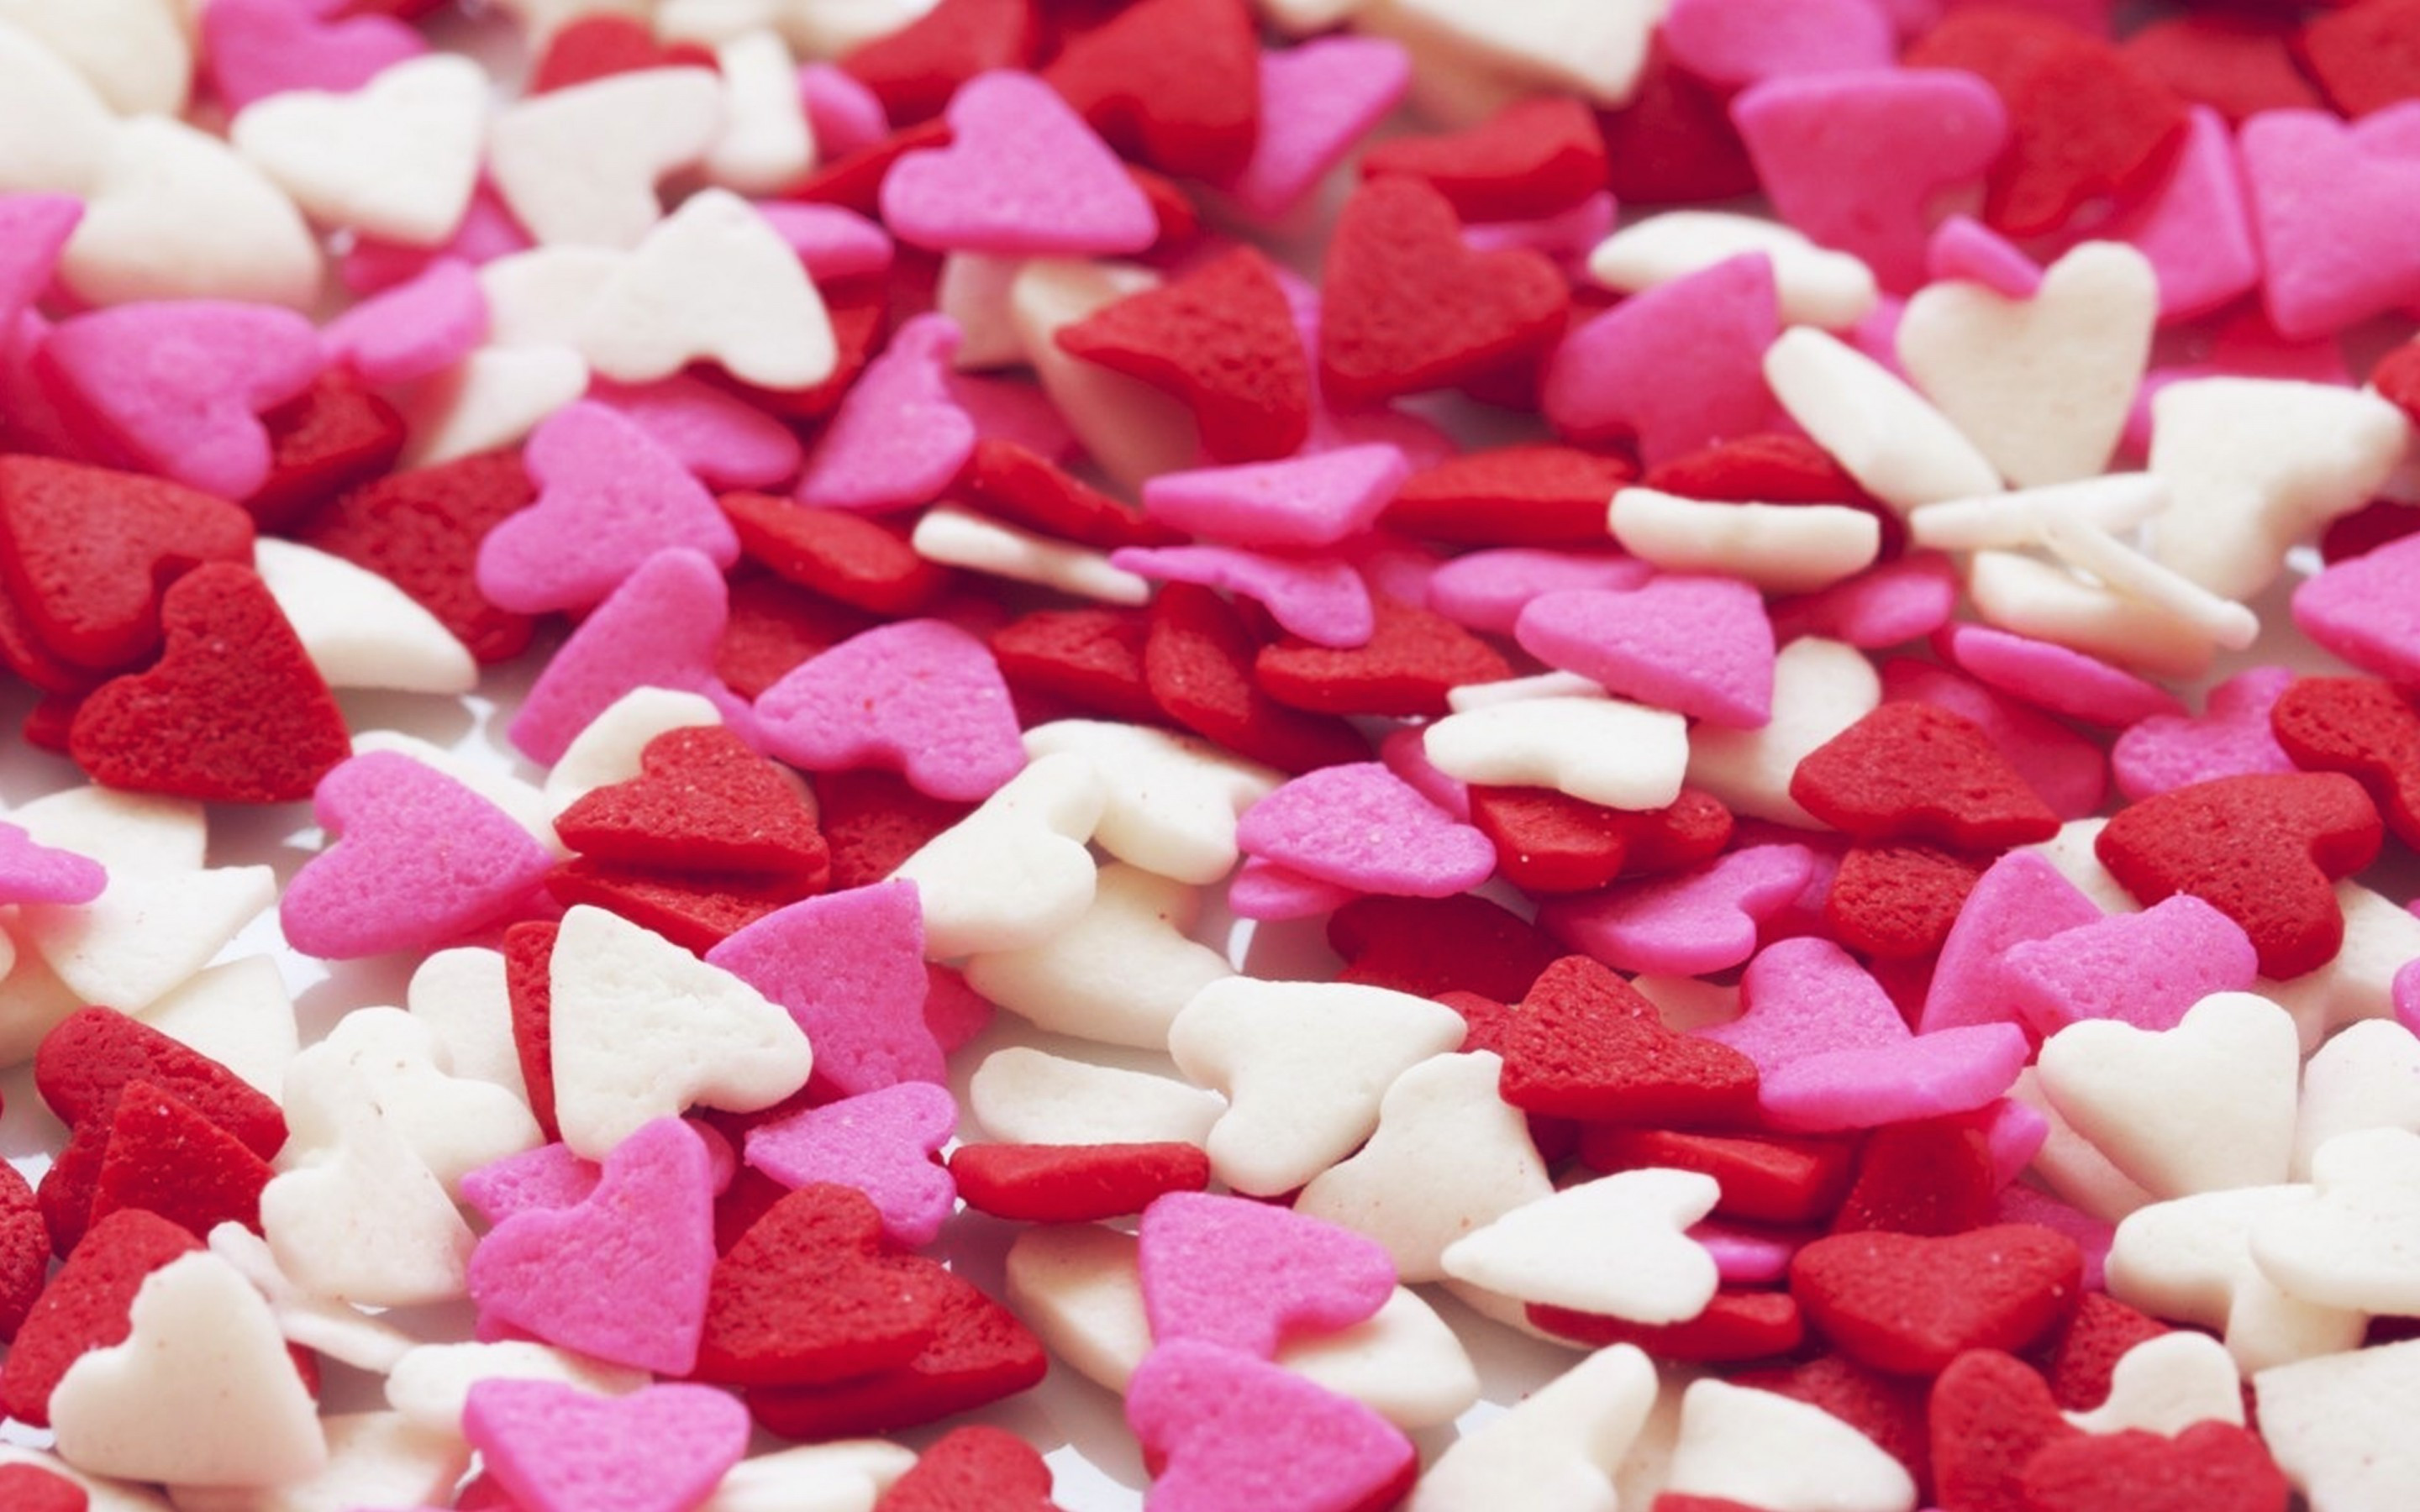 Download 2880x1800 Hearts, Romantic, Candies, Valentine's Day Wallpaper for MacBook Pro 15 inch